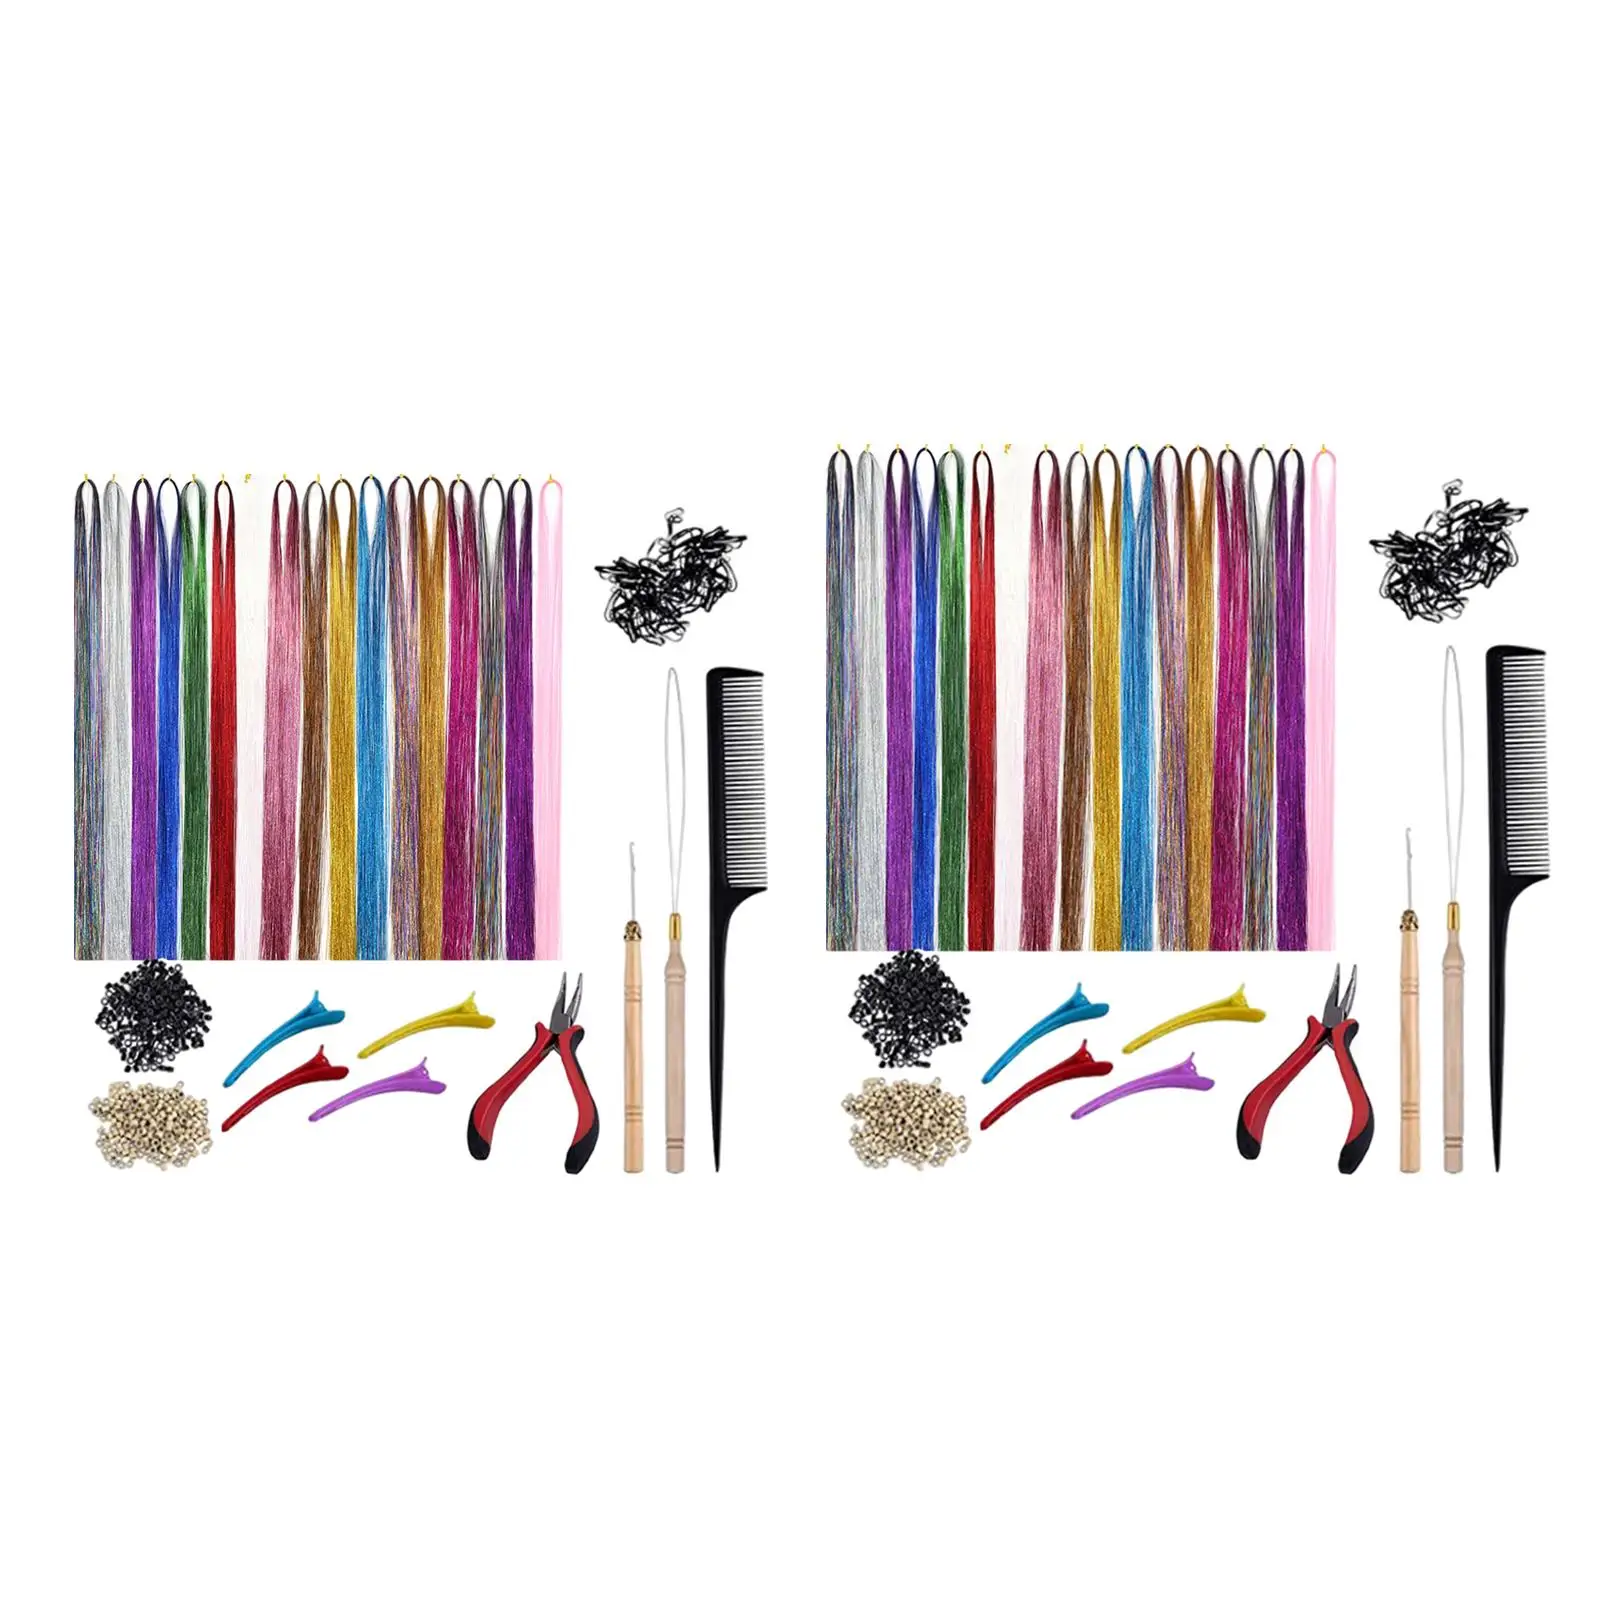 Hair Extension Tinsel Kit with Tools 200Pcs Rings Beads Multi-Color for Cosplay Hair Styling Salon Braiding Hair Women Girls